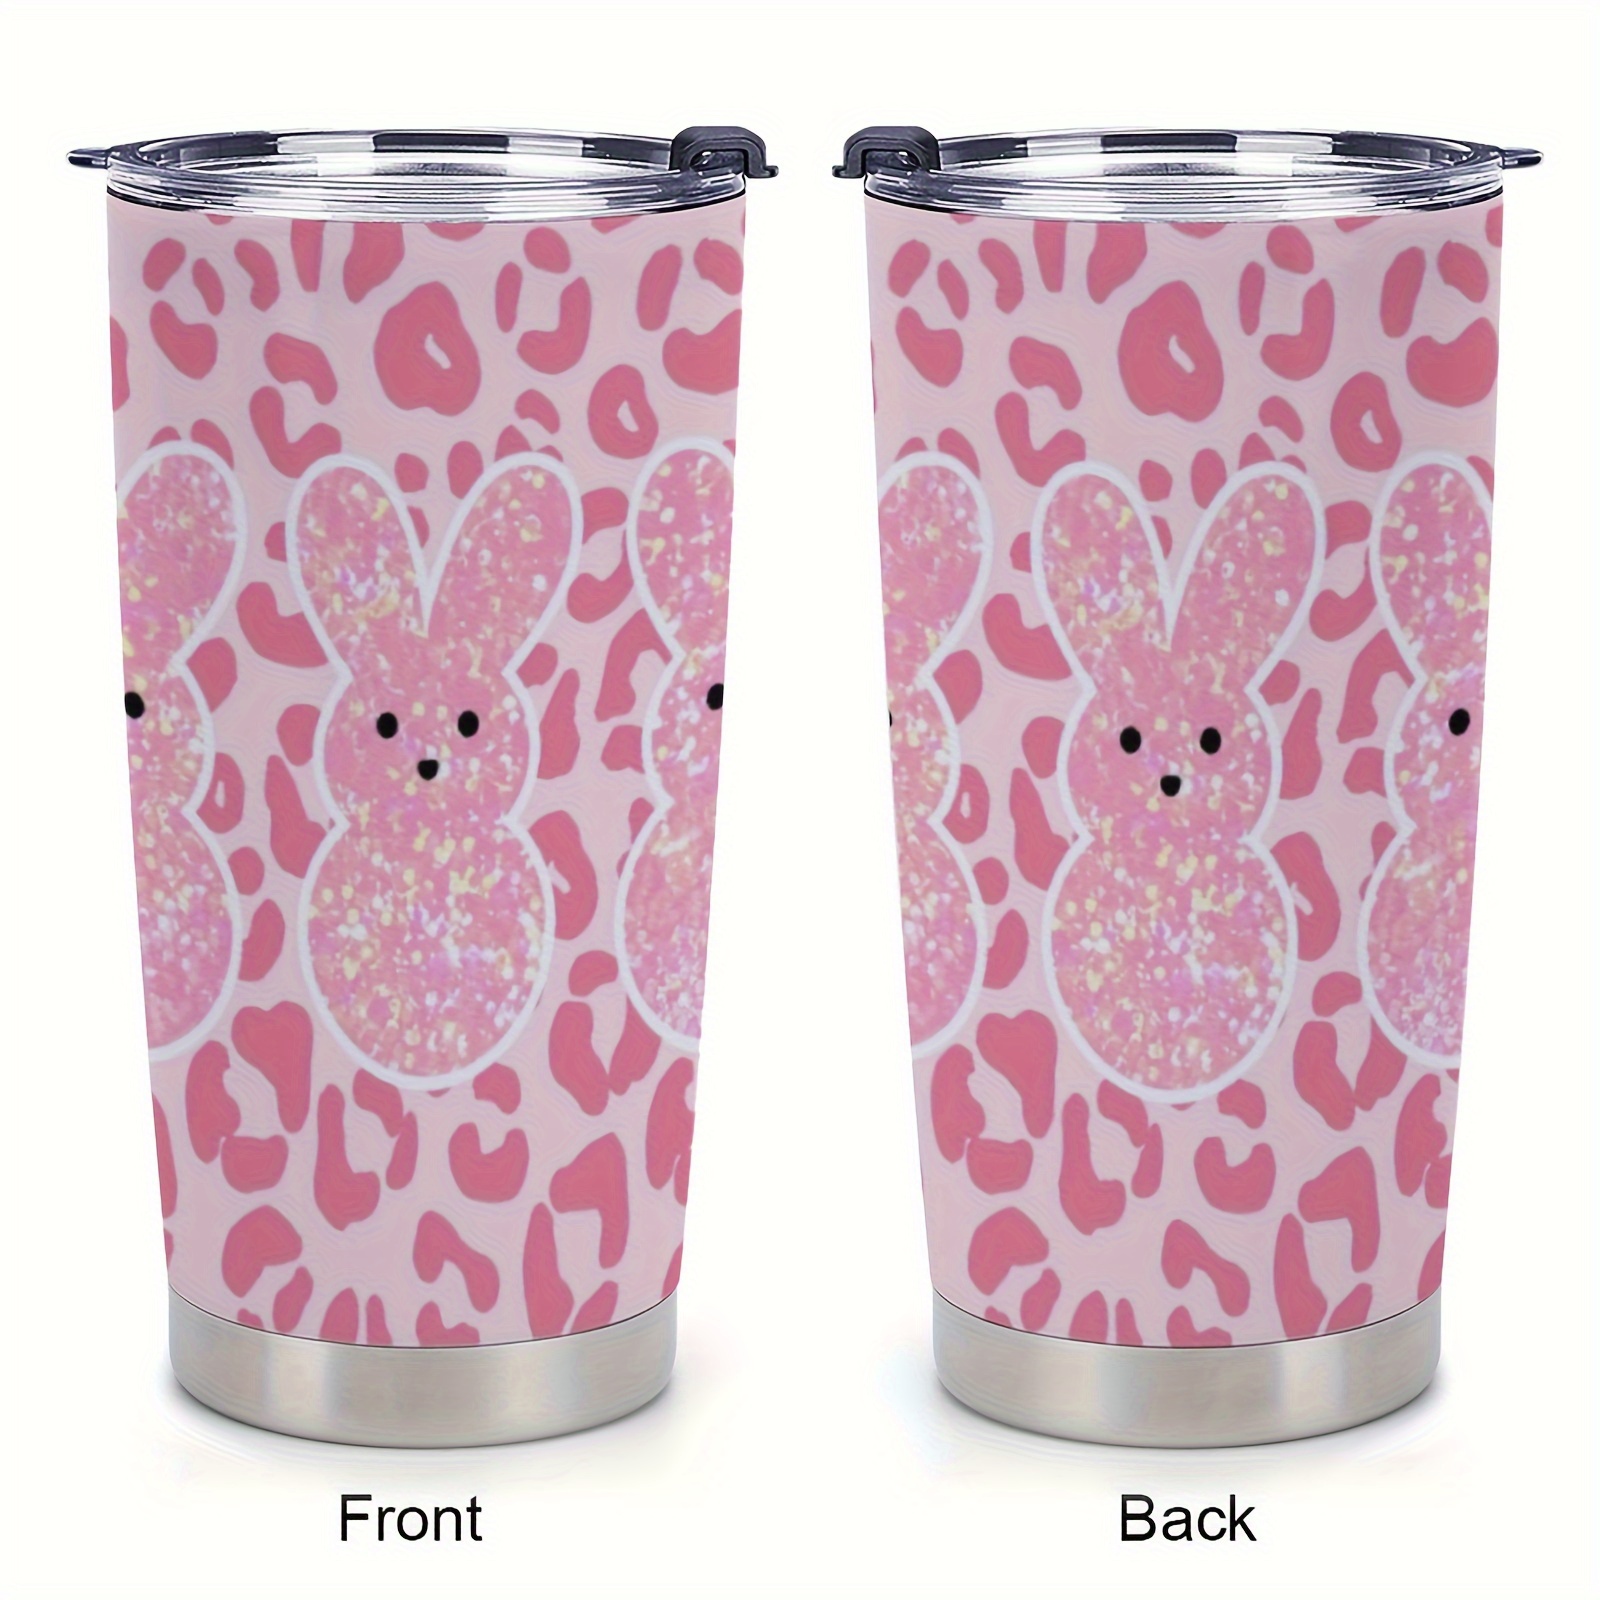 

1pc, 20oz Stainless Steel Car Cup, Bunny Leopard Print Design, Double-walled Vacuum Insulated Travel Coffee Cup With Lid, Gifts For Parents & Friends, Easter Basket Filler